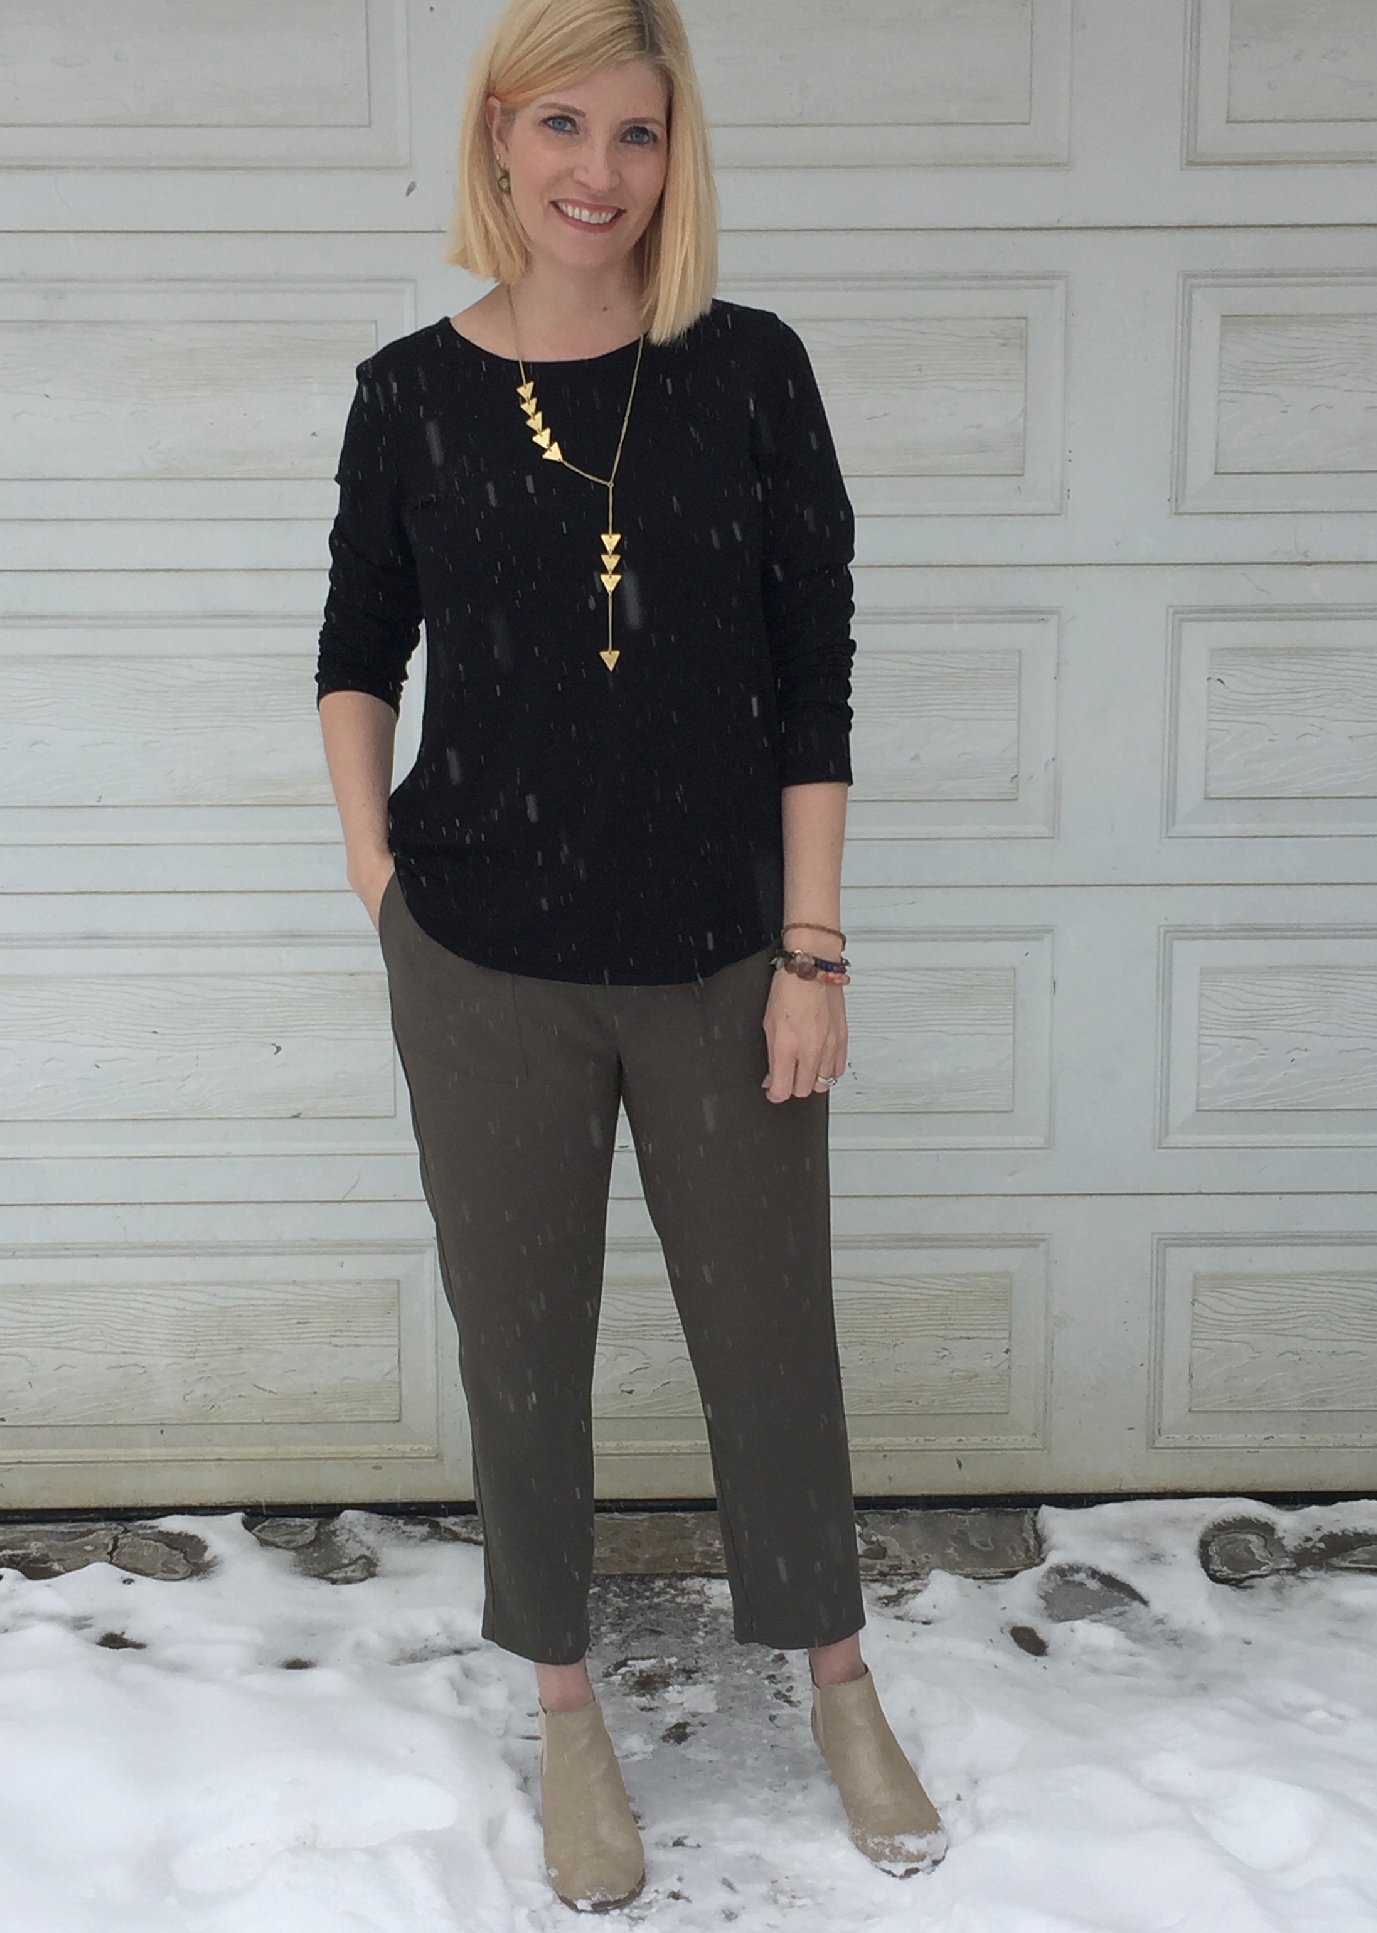 Old School Business Casual - The Spirited Thrifter